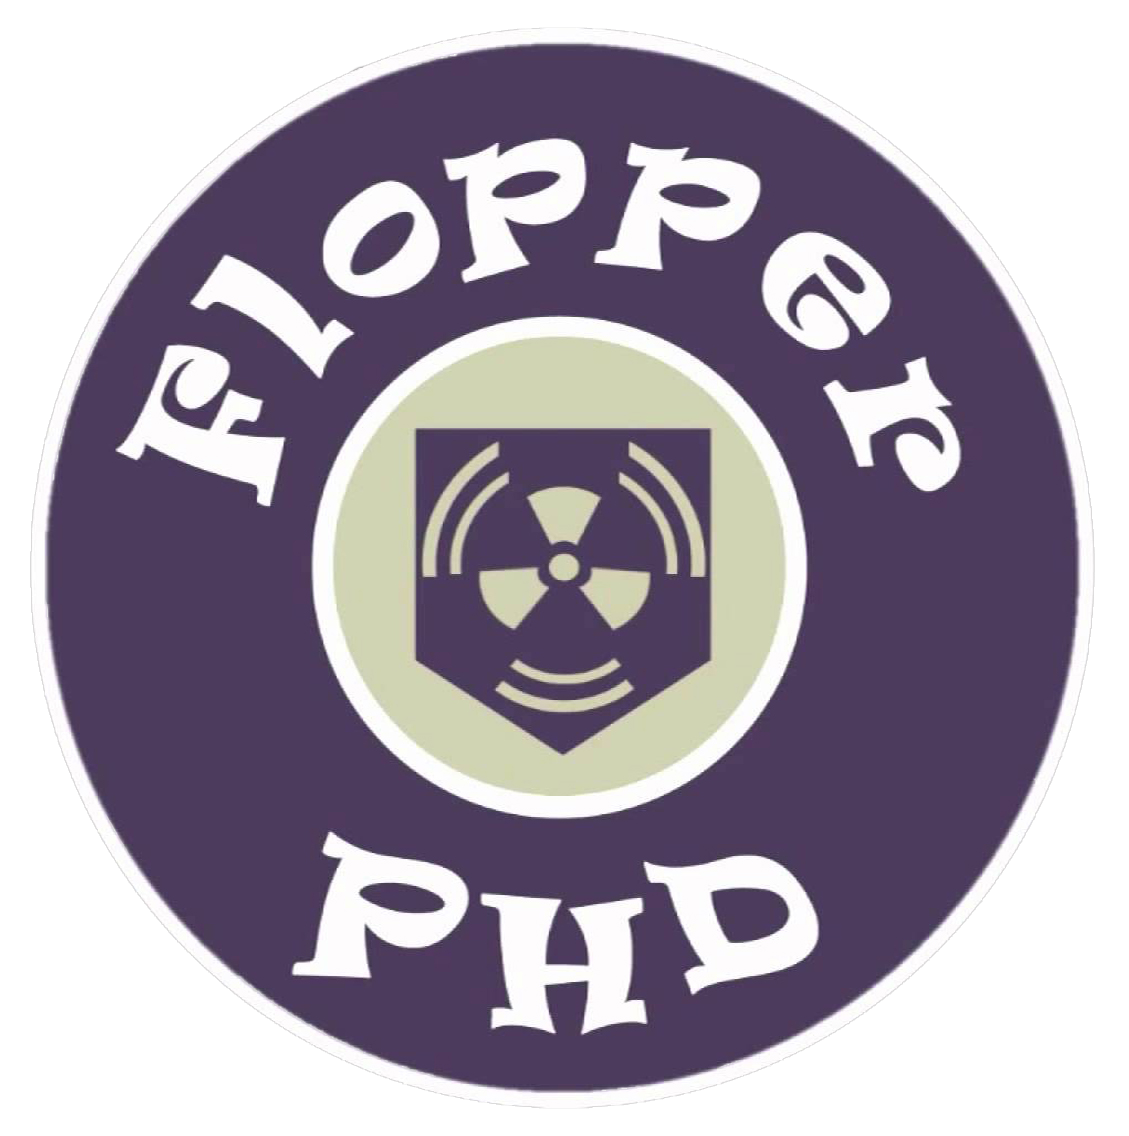 what does phd mean in phd flopper